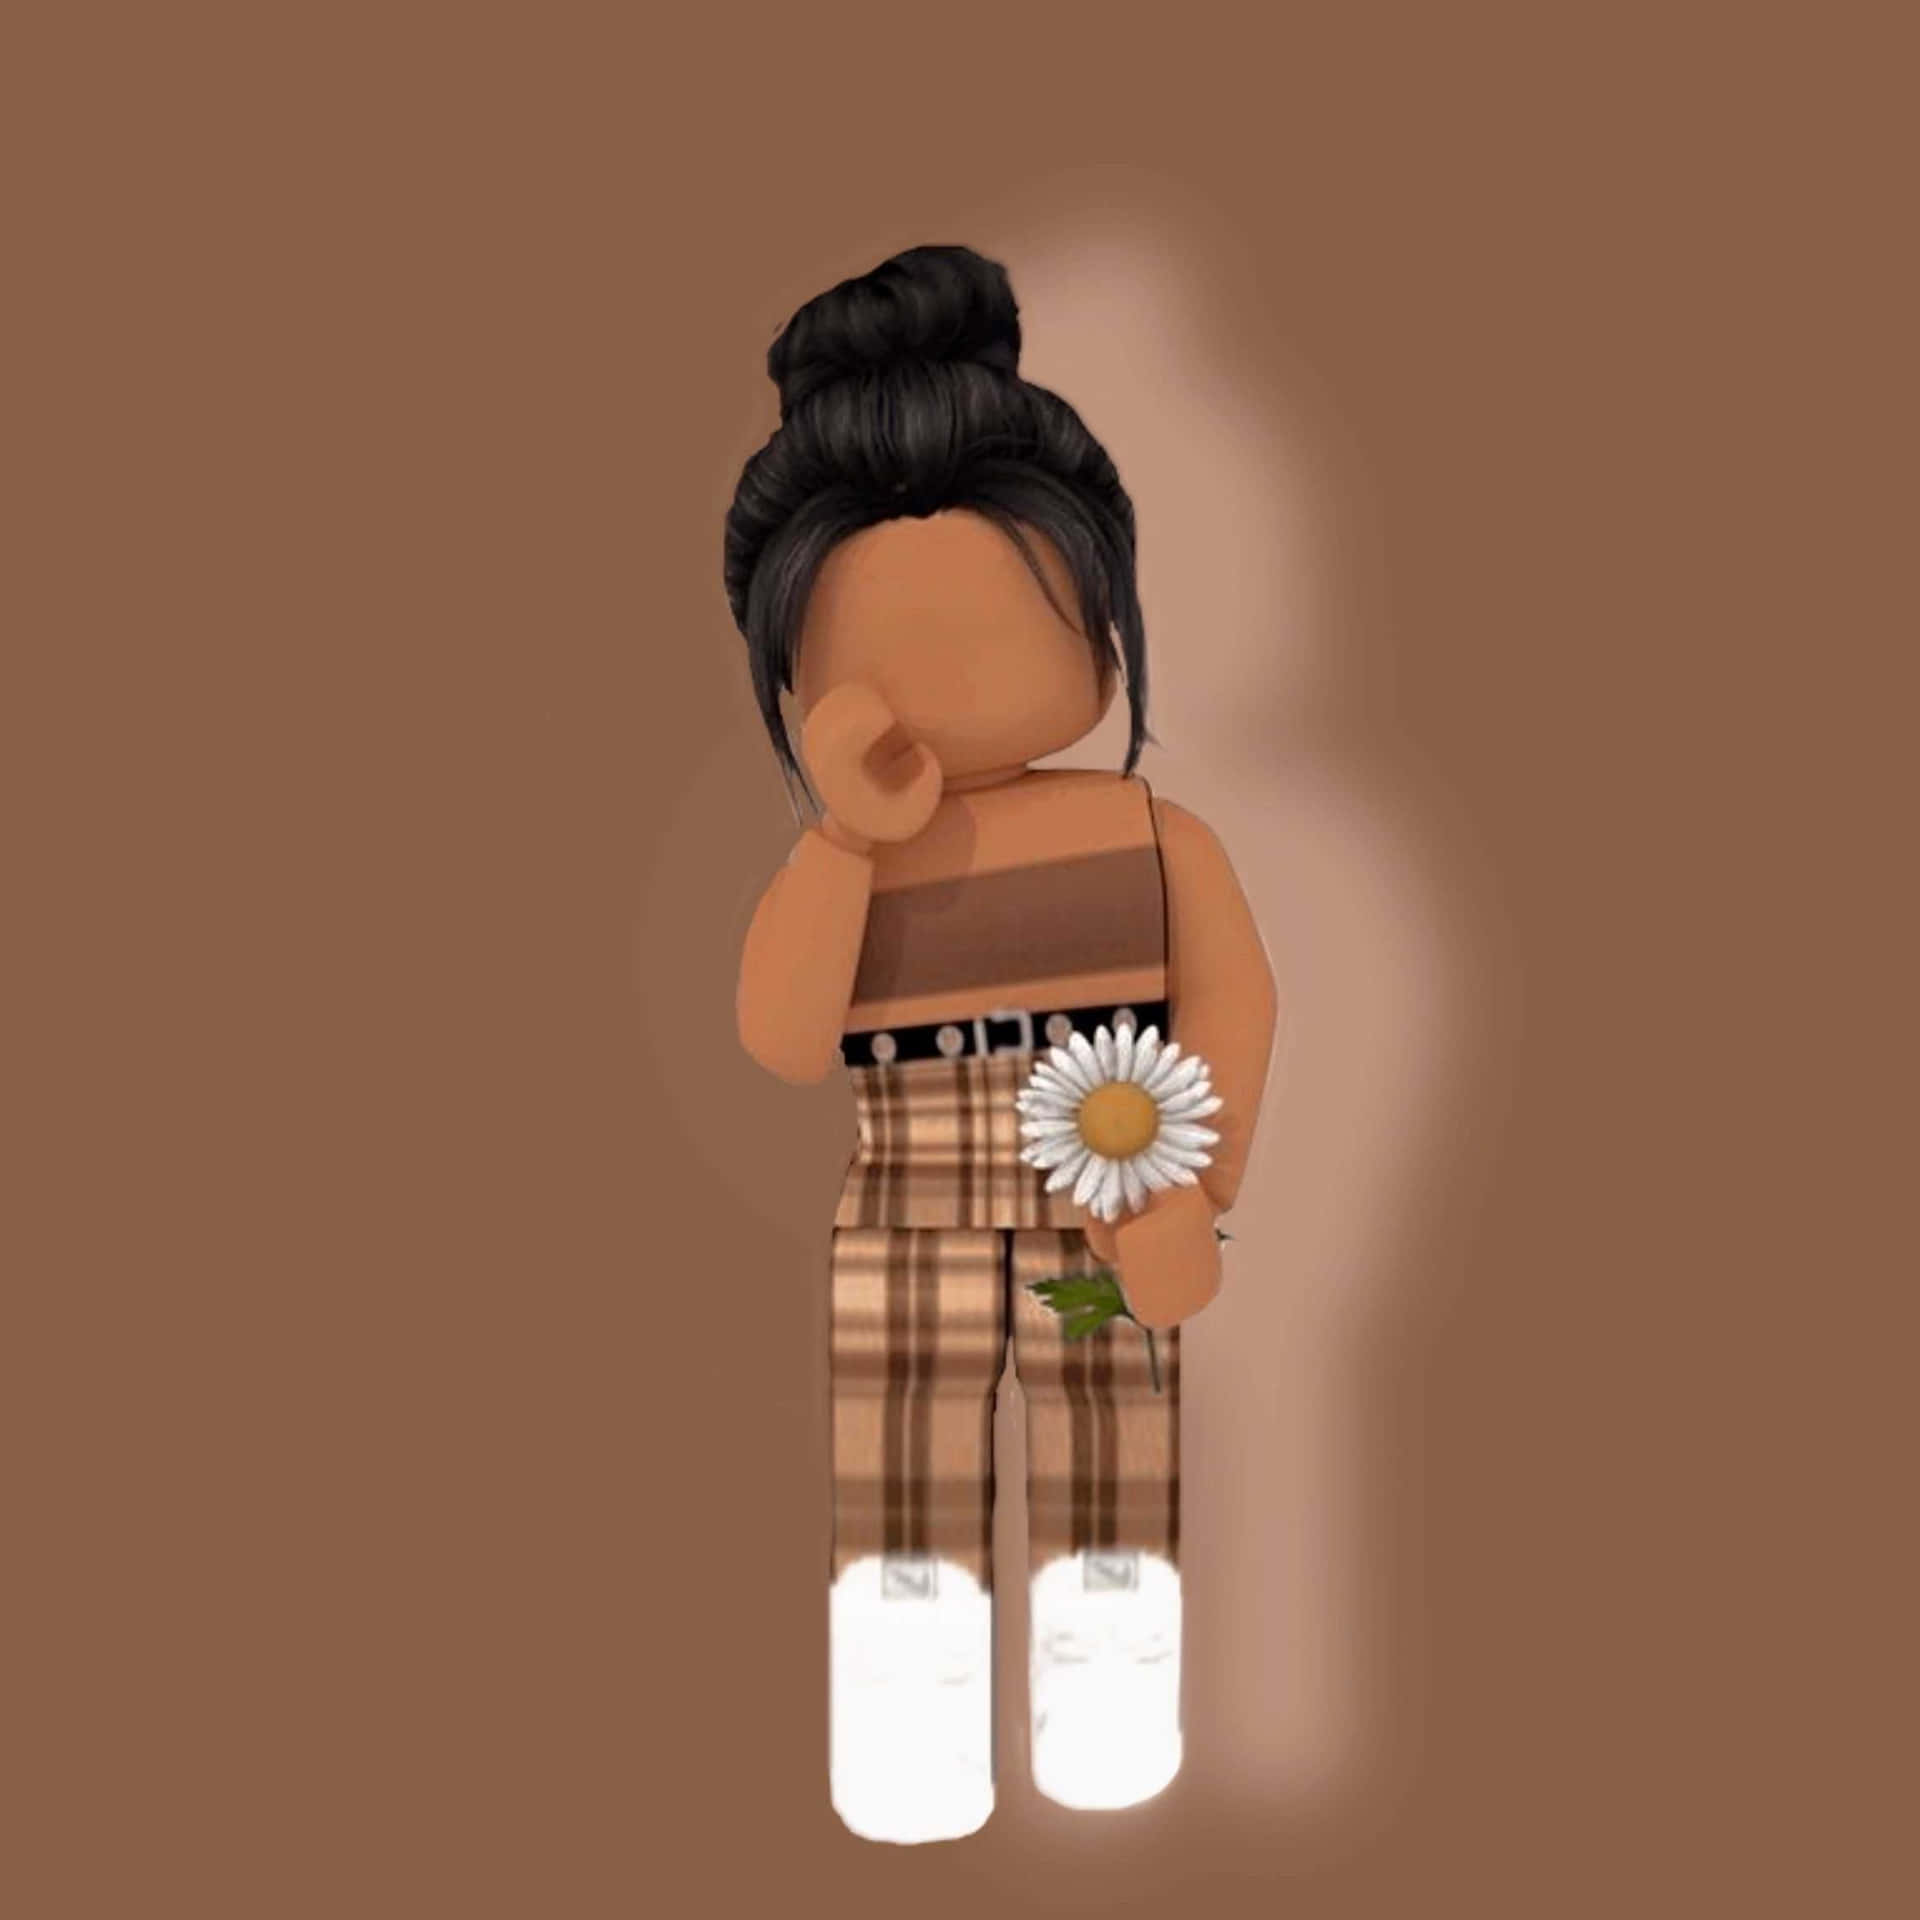 is my roblox avatar aesthetic? : u/robloxquestions